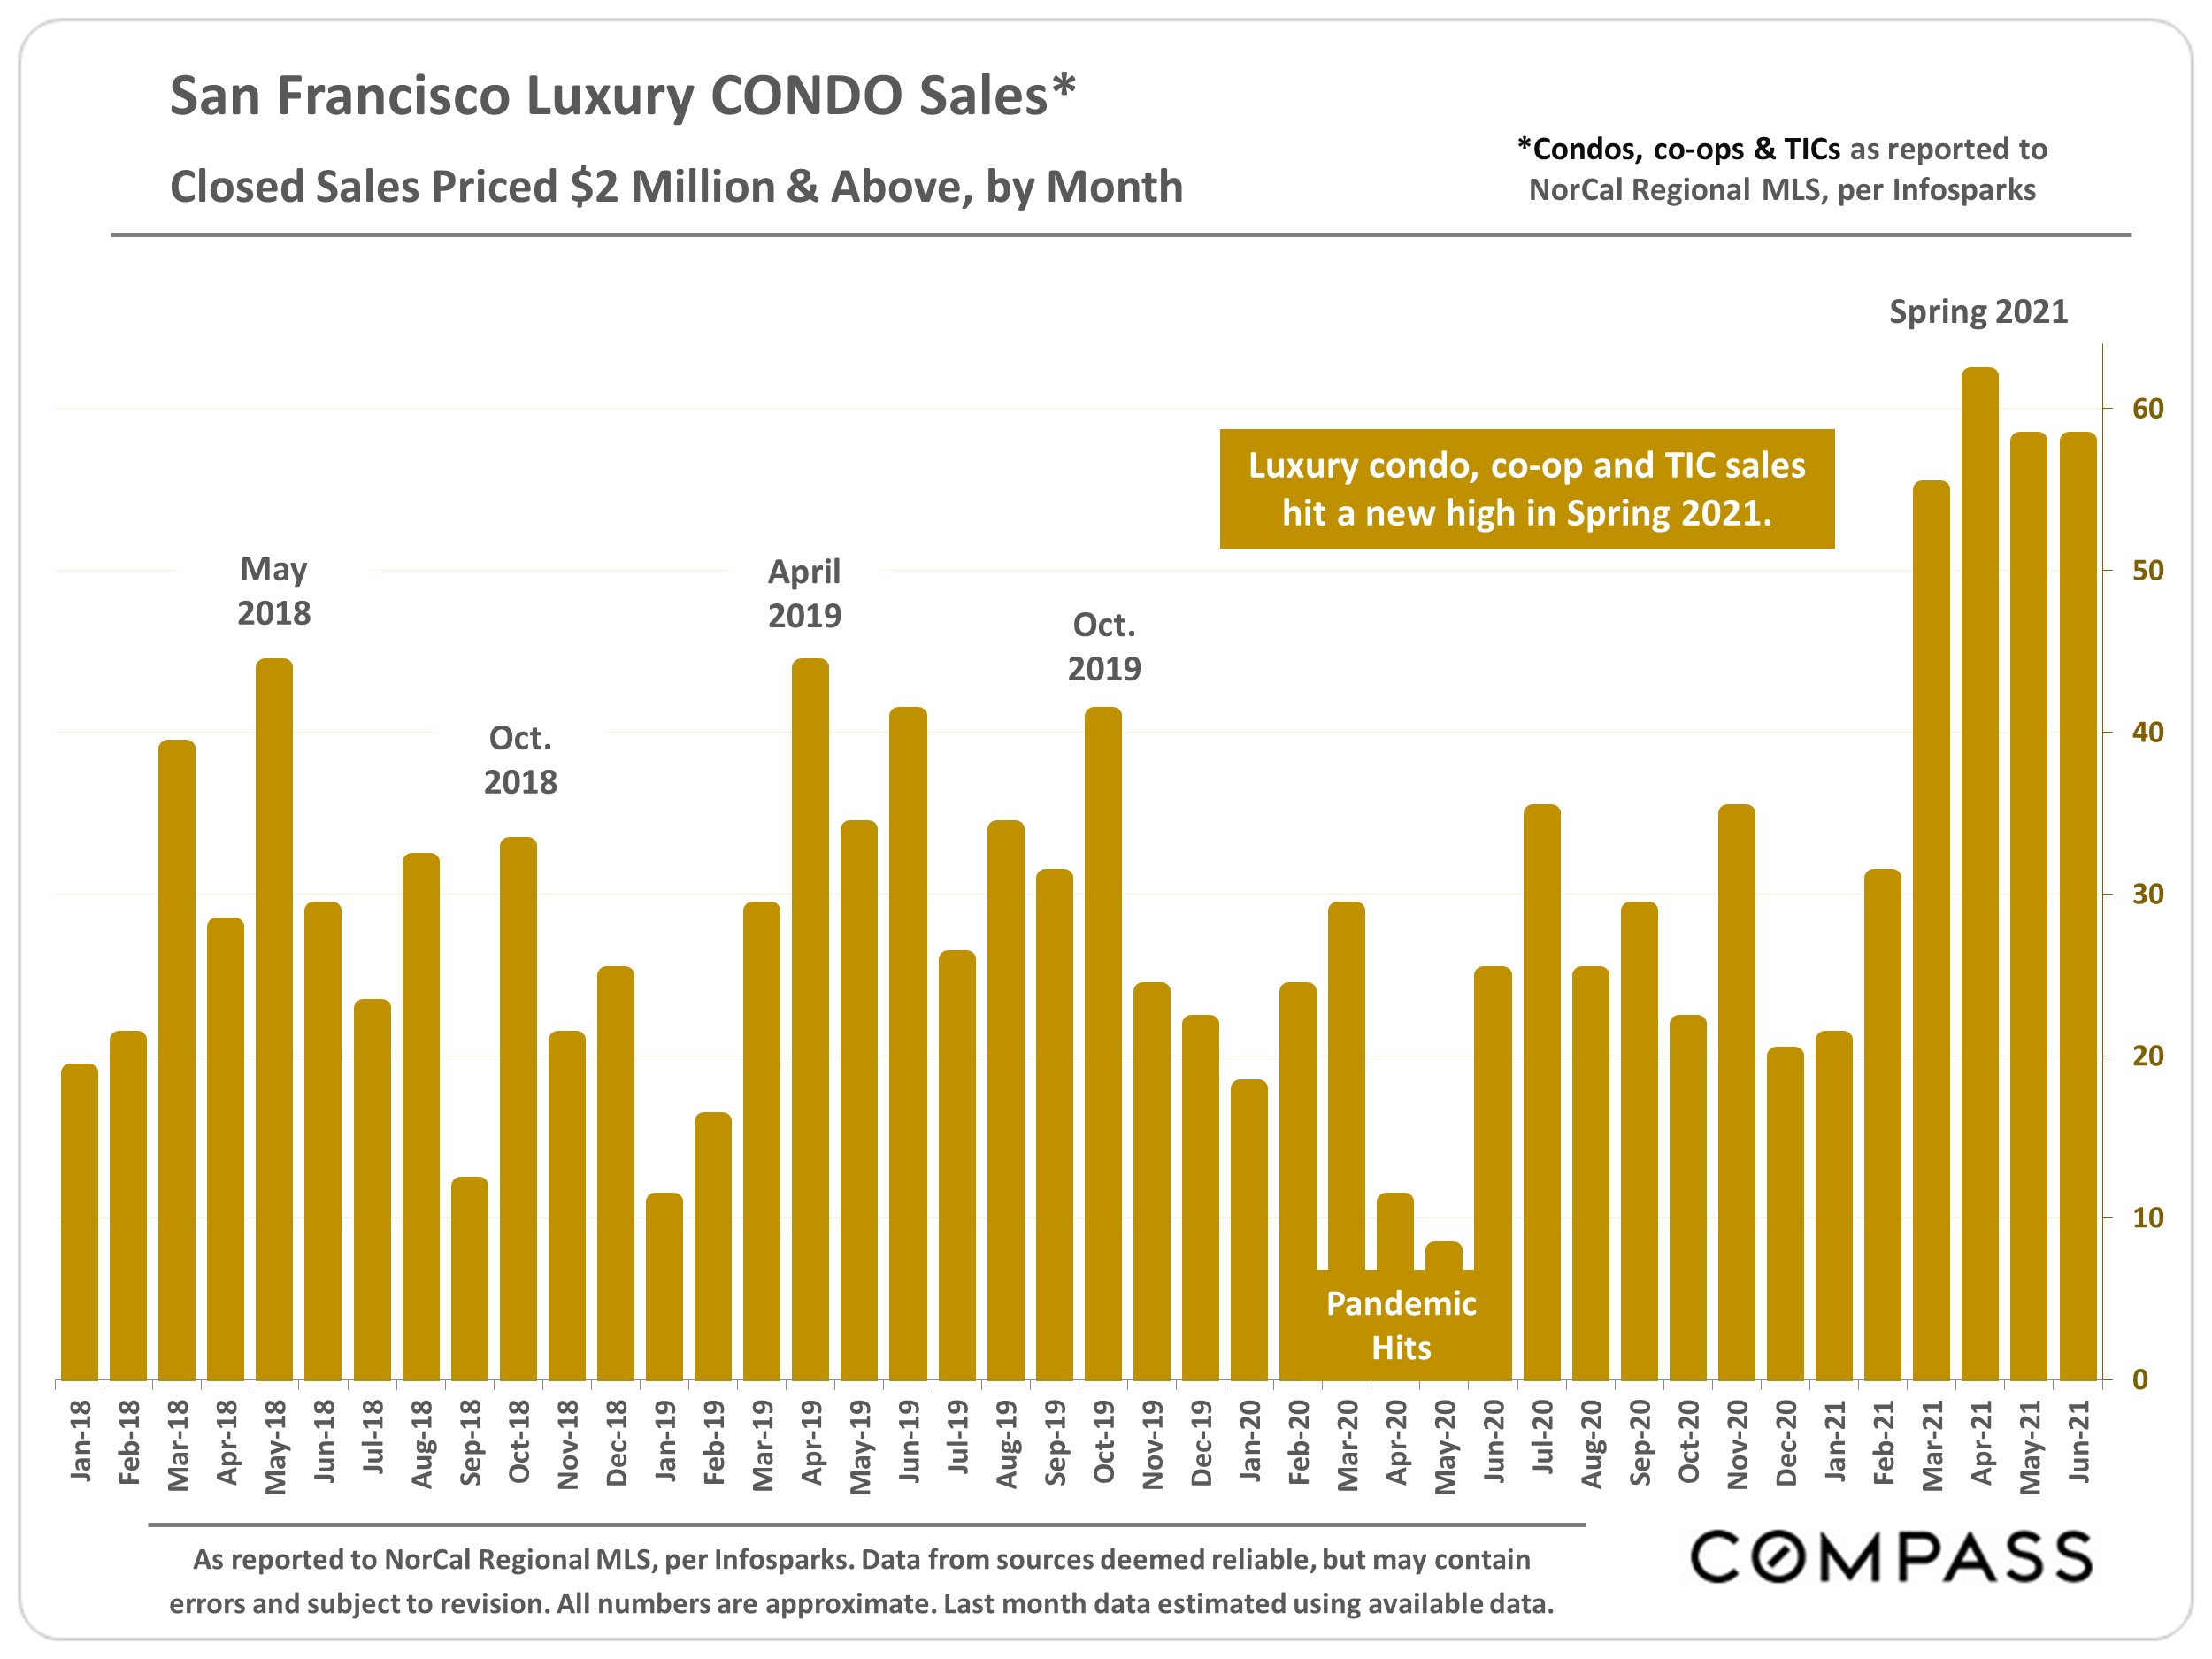 Graph showing San Francisco Luxury Condo Sales, Closed Sales priced at $2M and above, by month, from Jan 2018 to Jun 2021